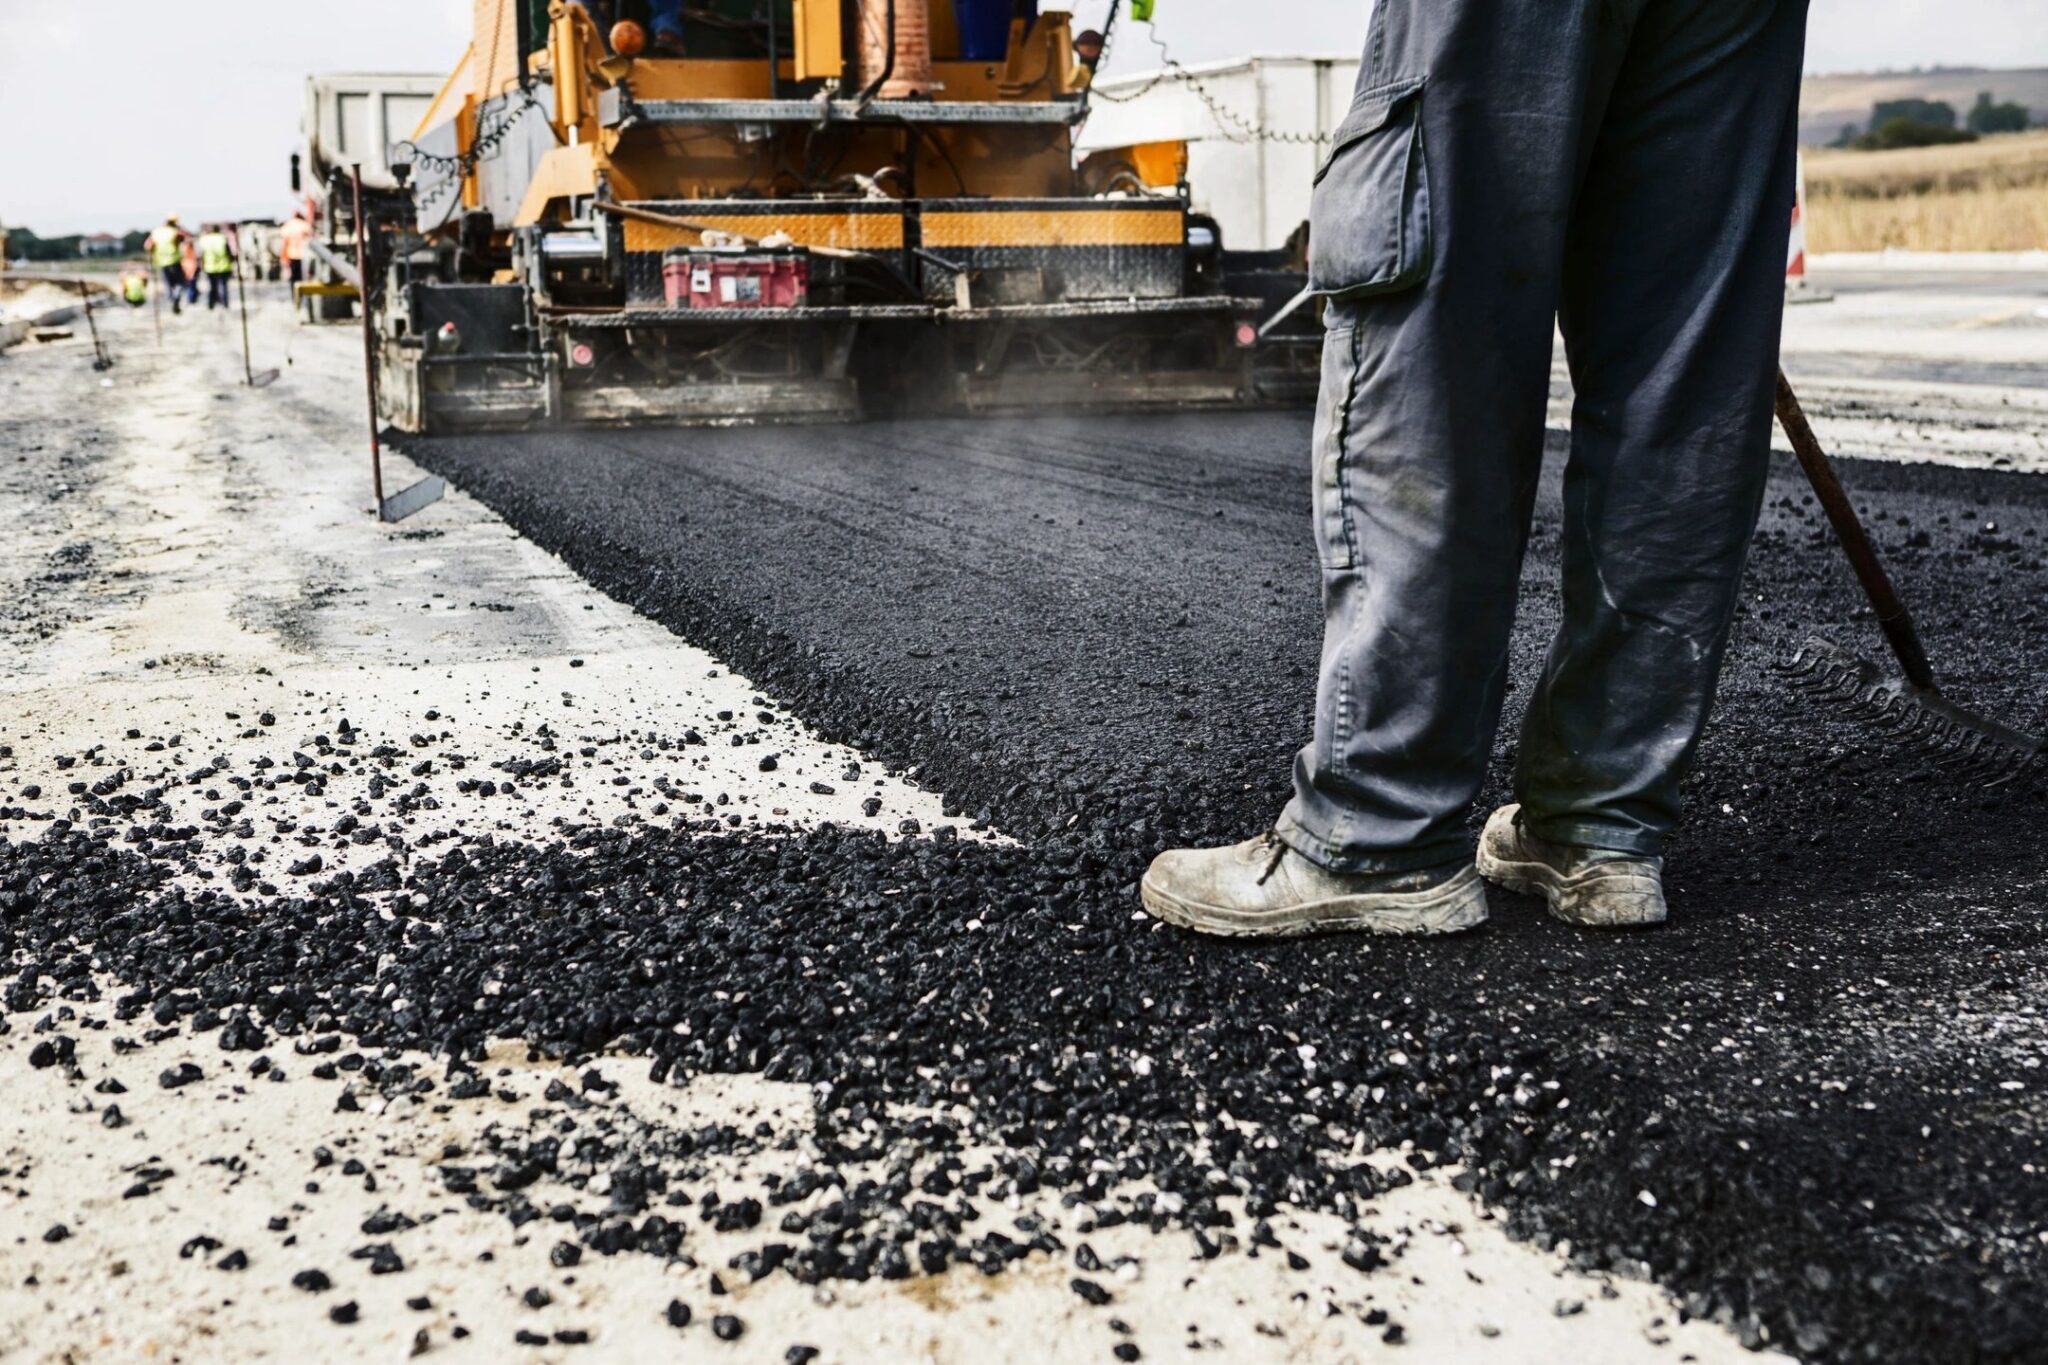 DPW announces road repaving projects, which will start in July